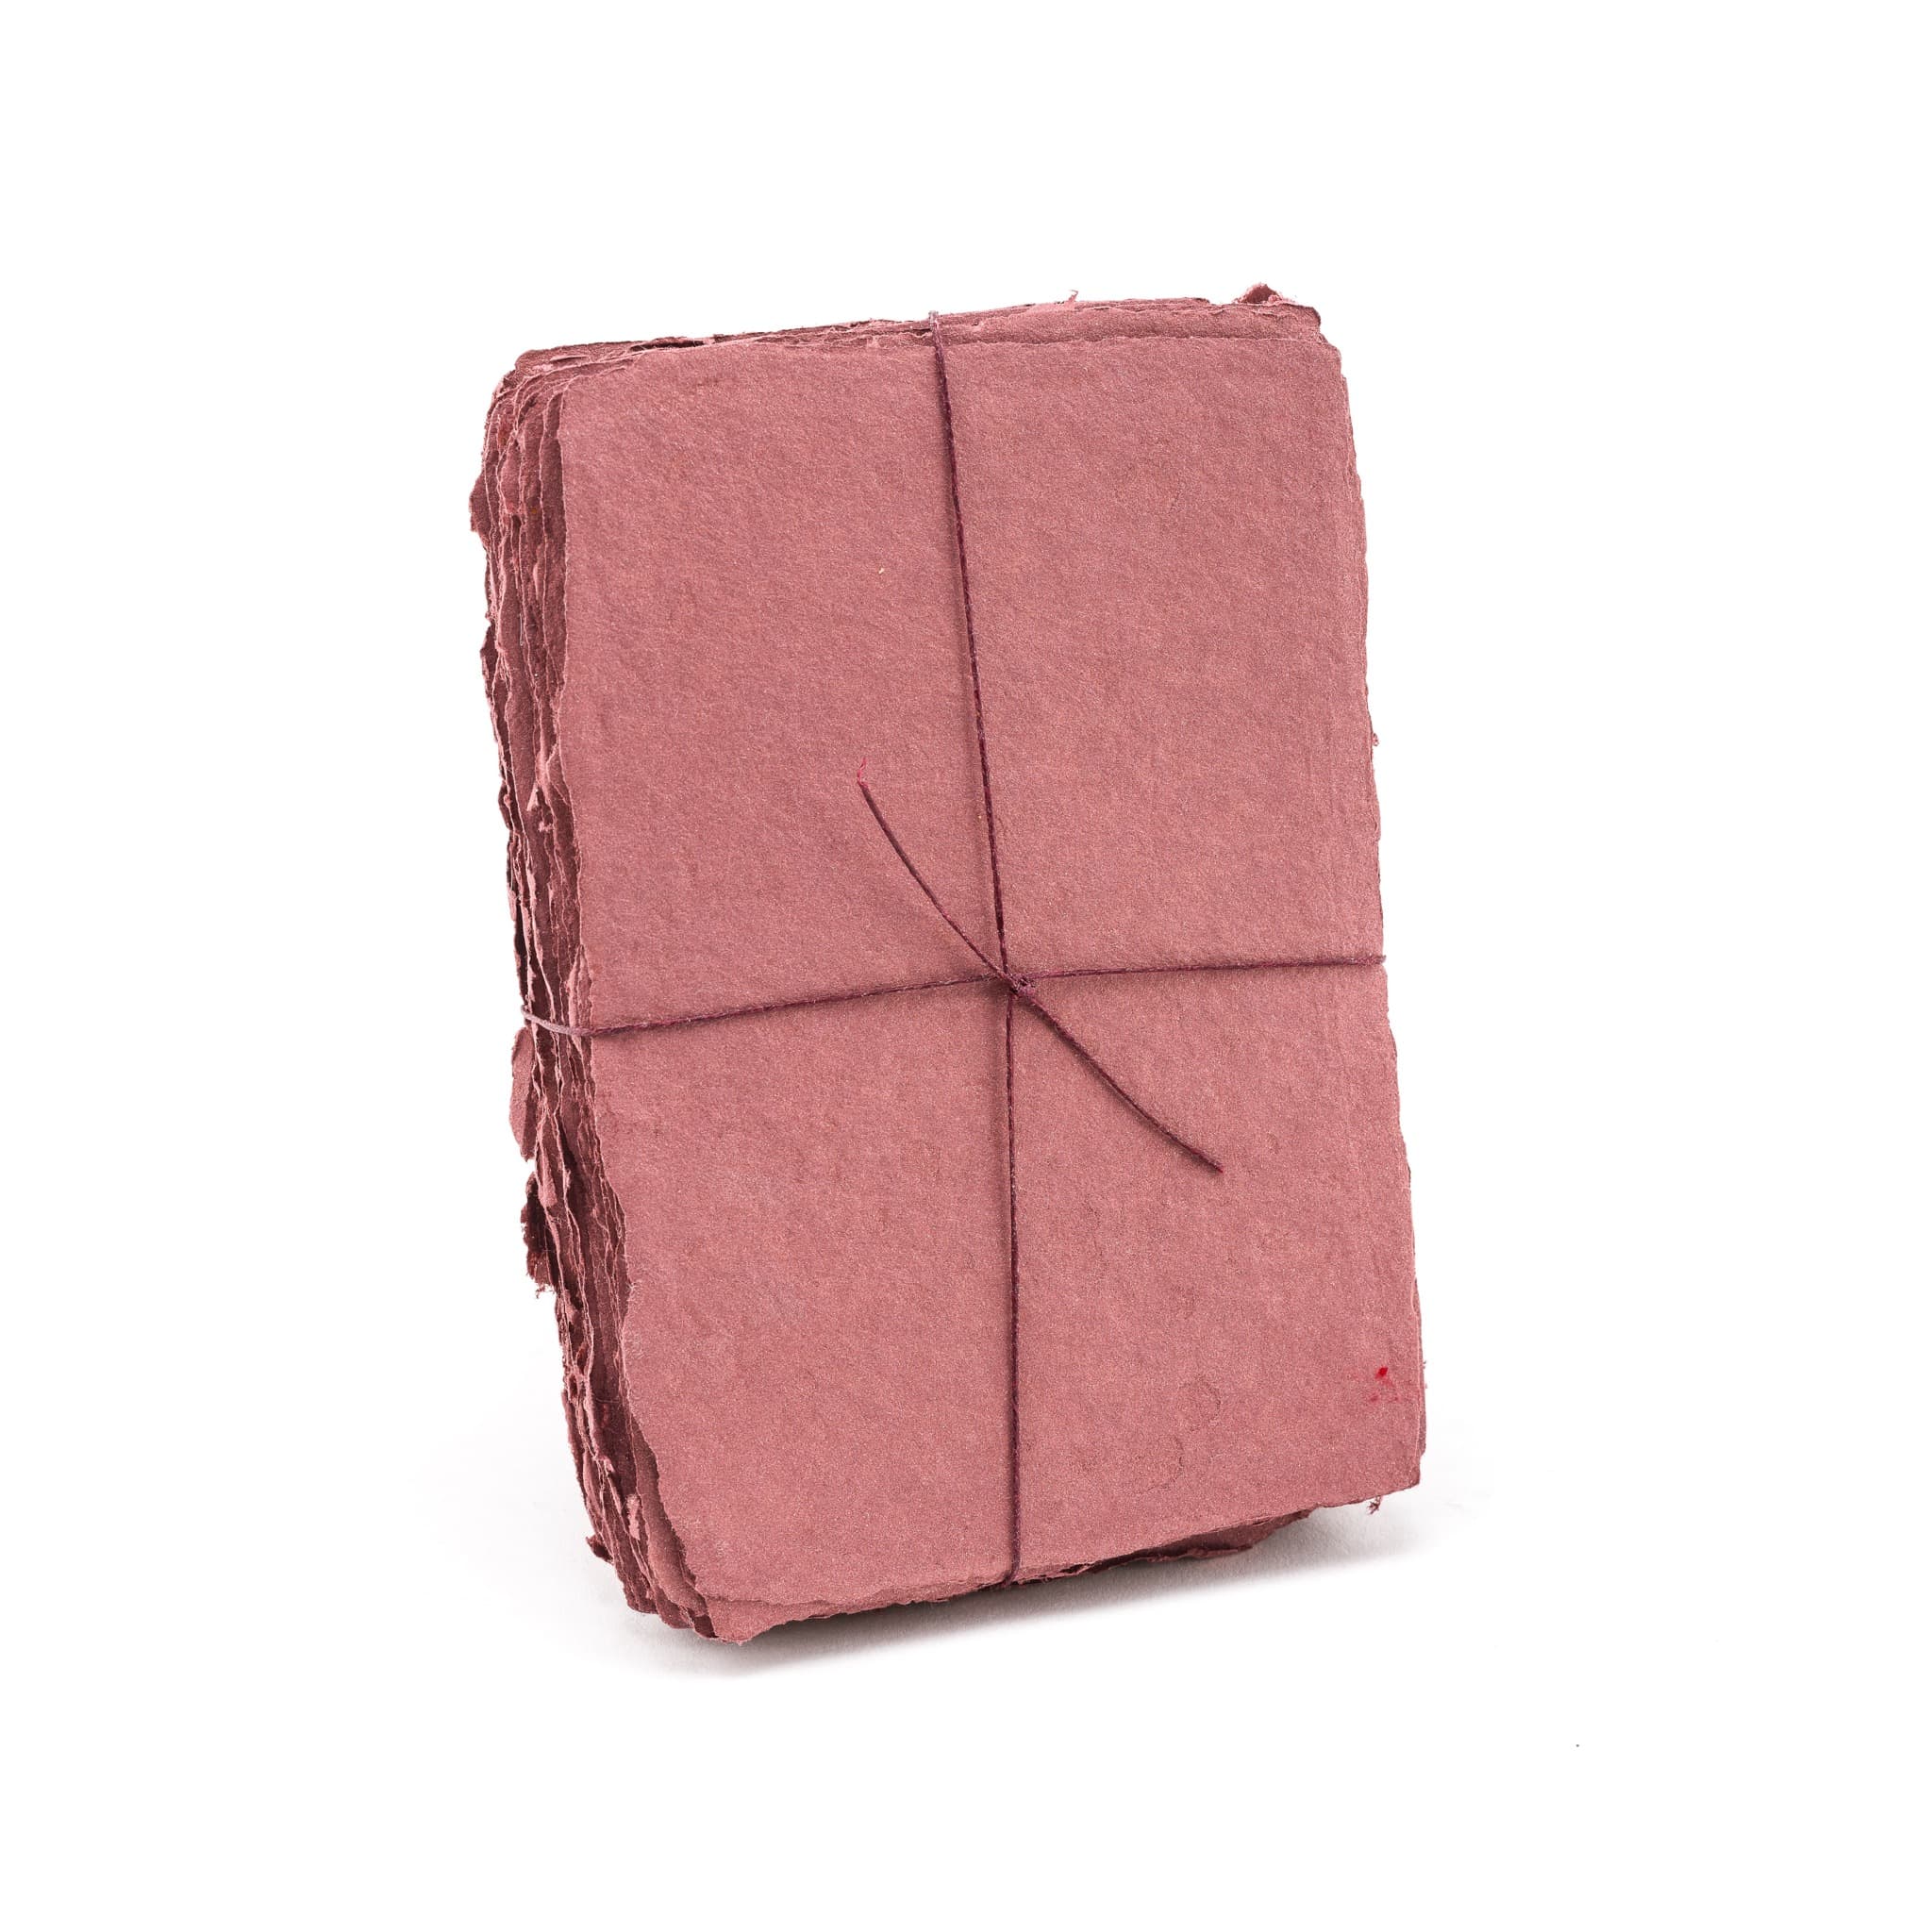 Pack of red shimmering handmade paper made with 100% cotton recycled from the apparel industry.